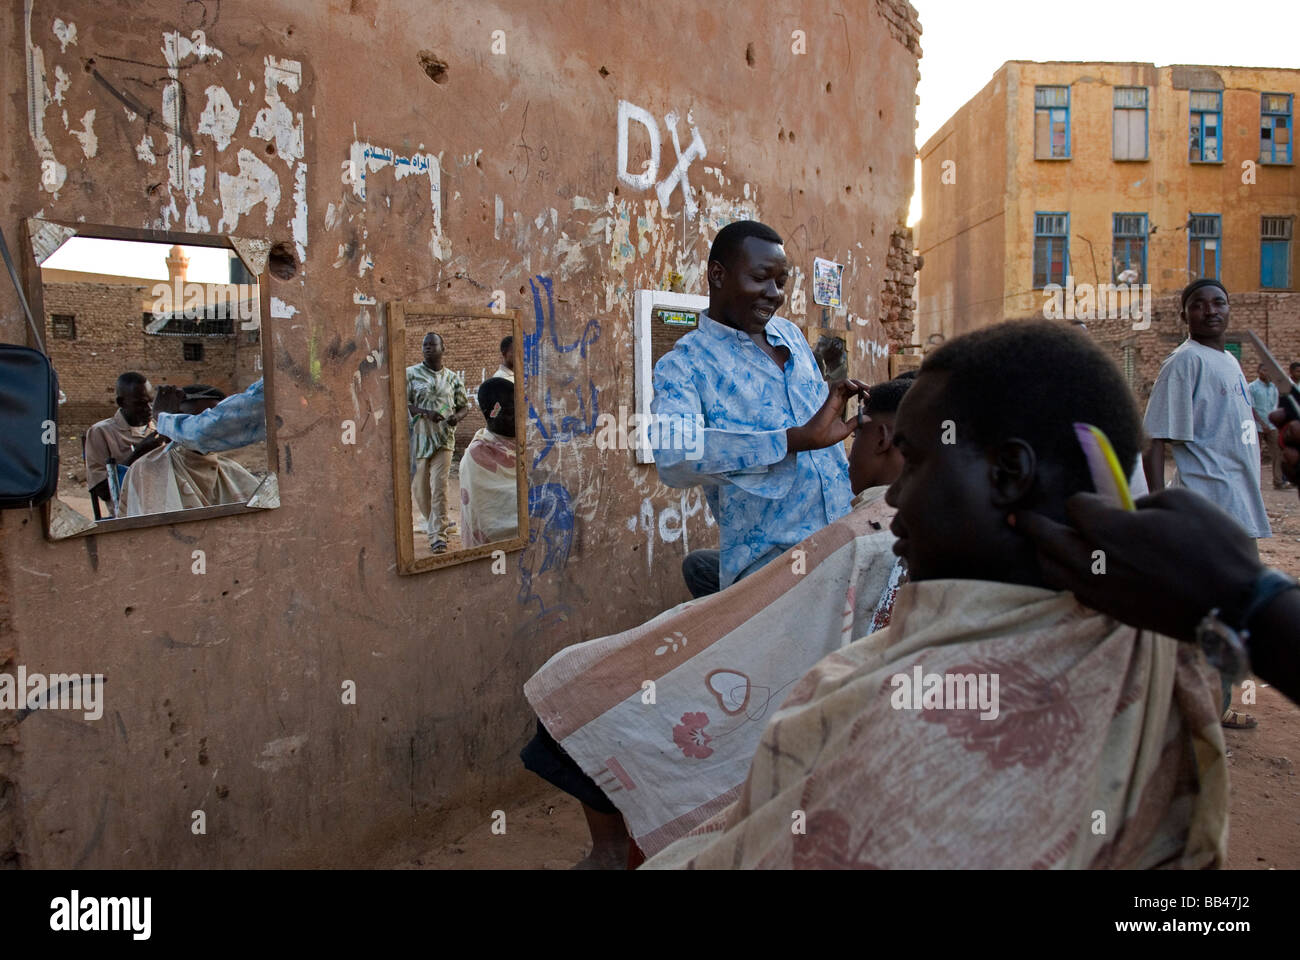 Barber giving a haircut on a street in the center of Khartoum, Sudan. Stock Photo